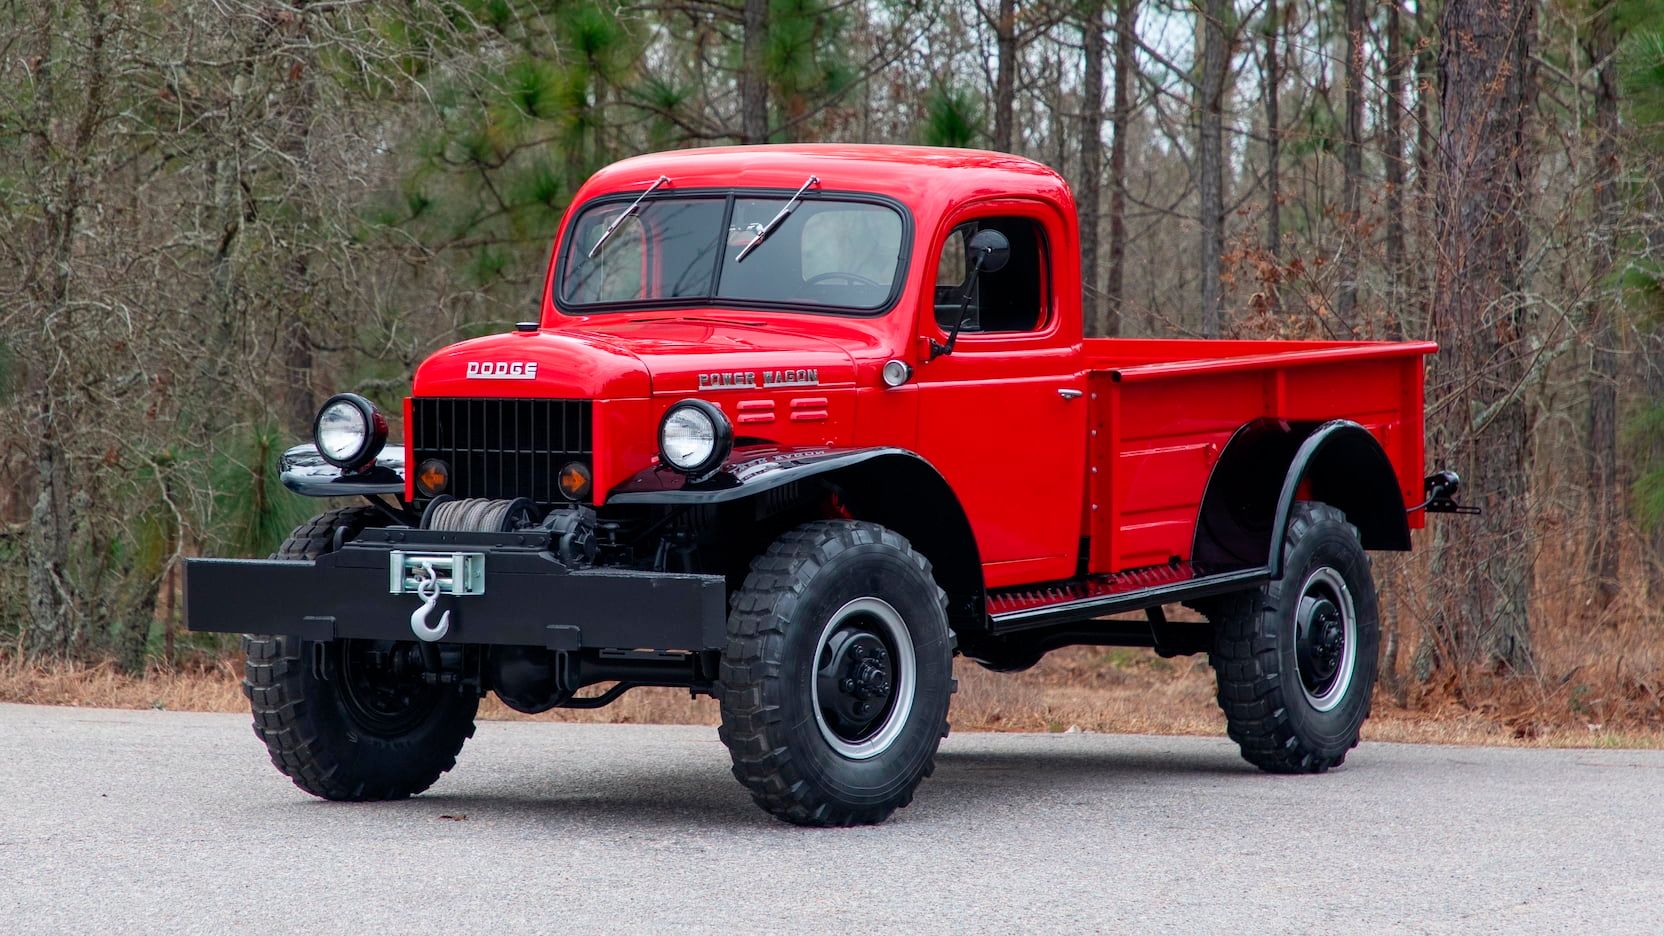 Red Dodge Power Wagon on an autumn day